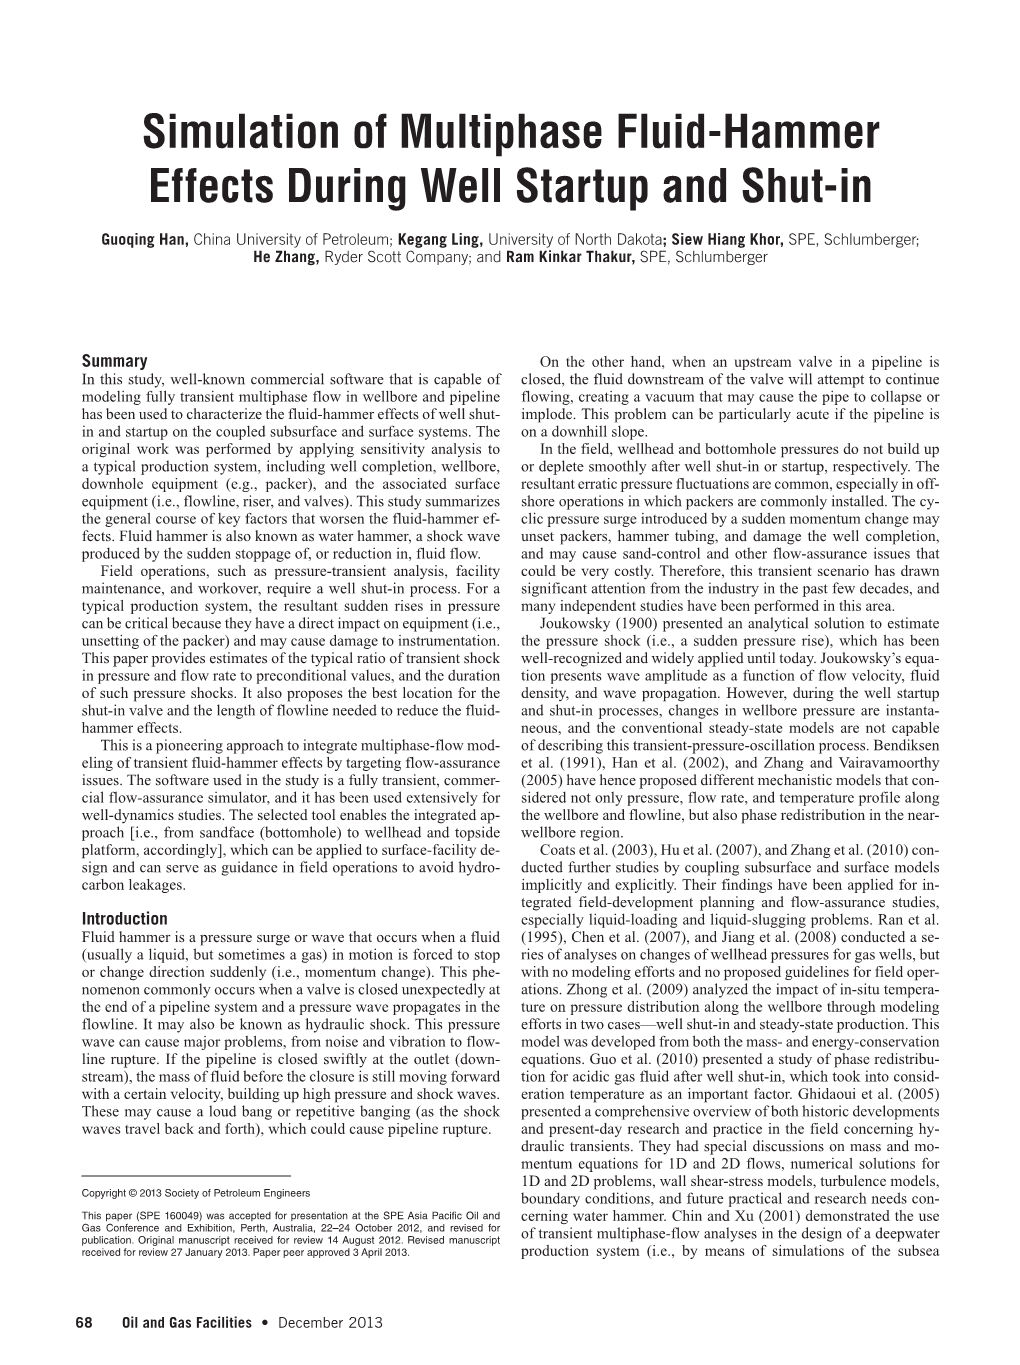 Simulation of Multiphase Fluid-Hammer Effects During Well Startup and Shut-In